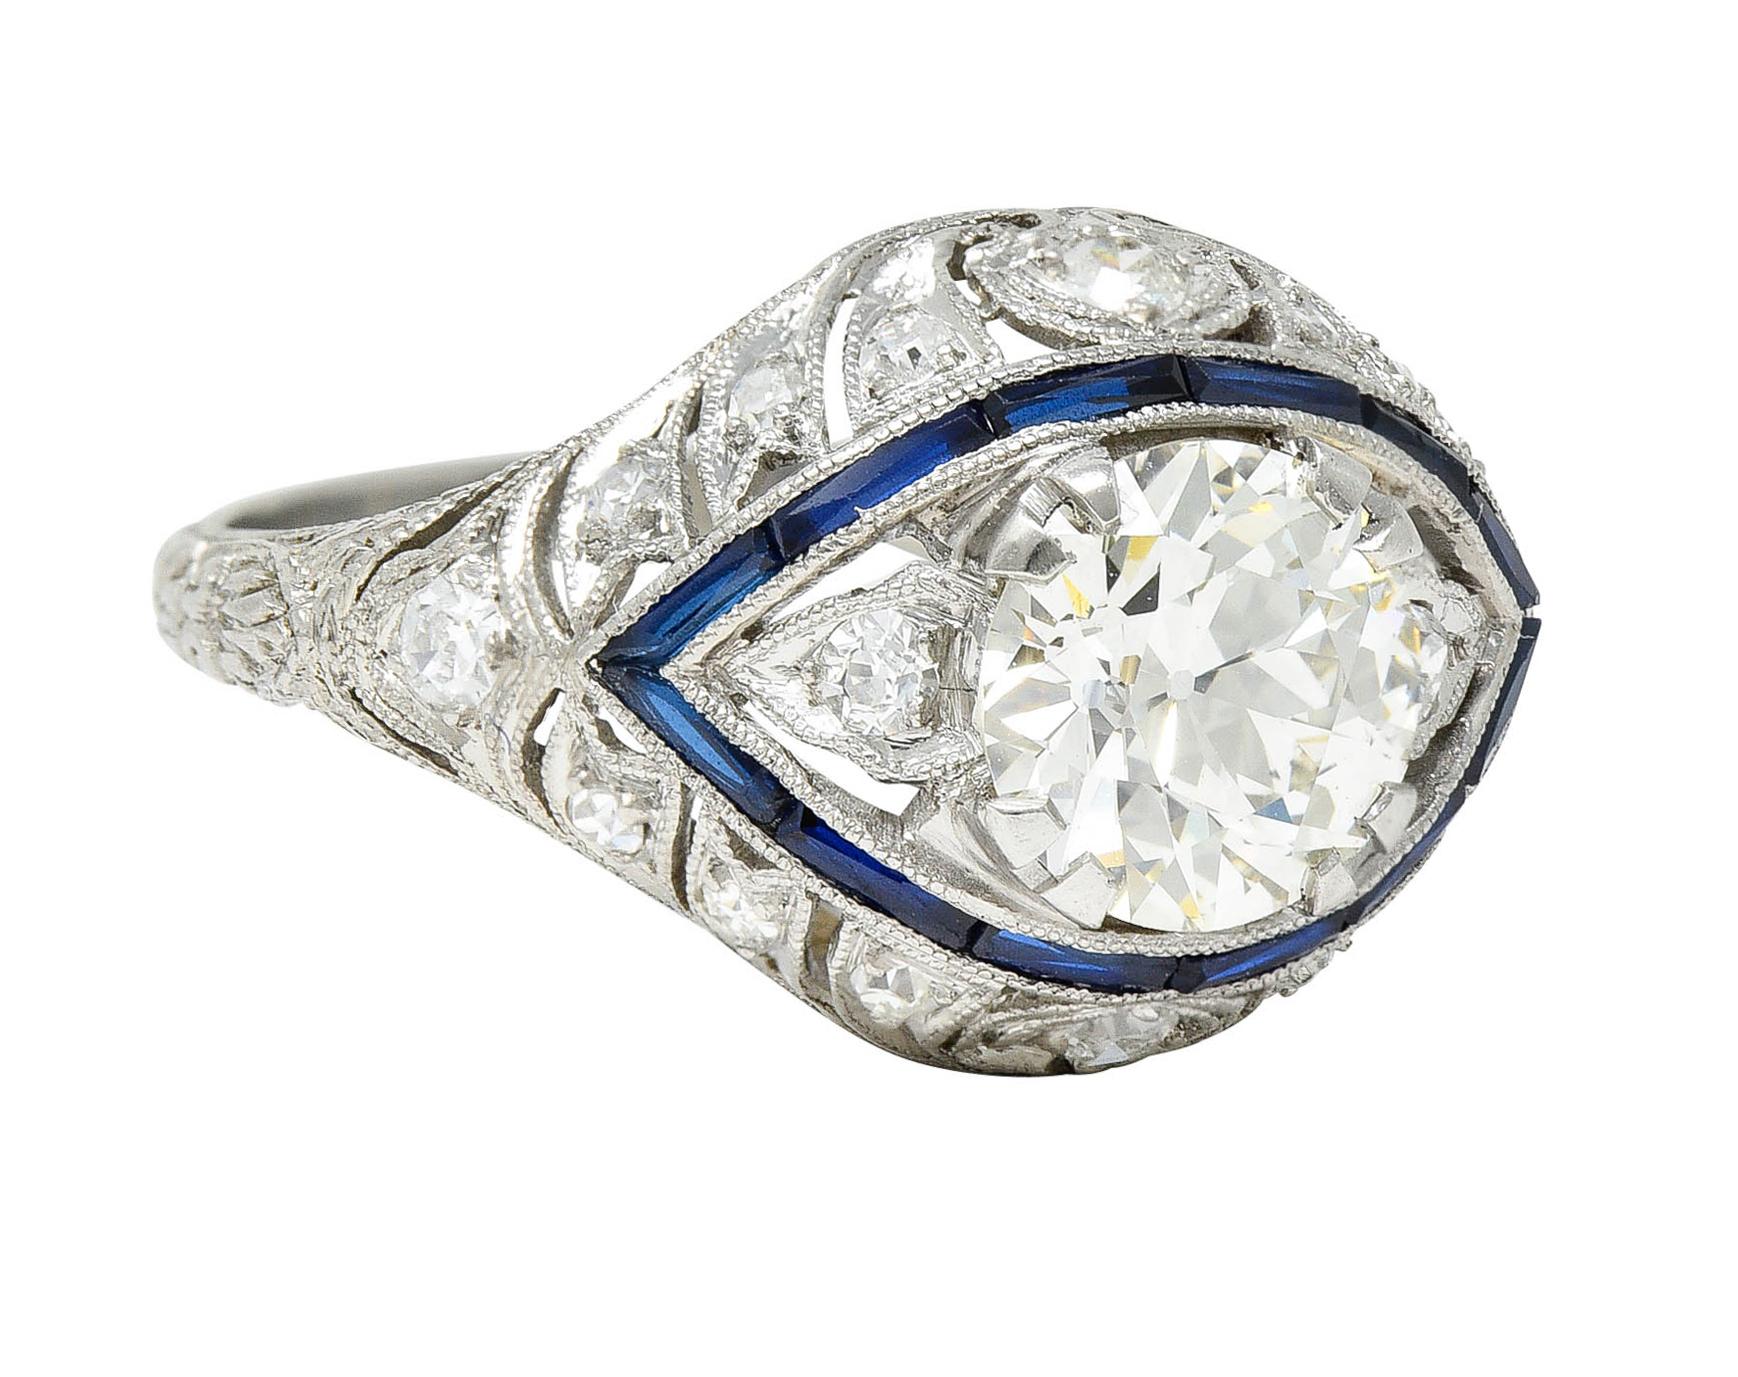 Featuring an old European cut center weighing approximately 1.35 carat - J/K color with SI1 clarity

Surrounded by a halo of calibrè cut natural and synthetic sapphires - bright royal blue in color

Bombè style mounting with ribbon-like tendrils and